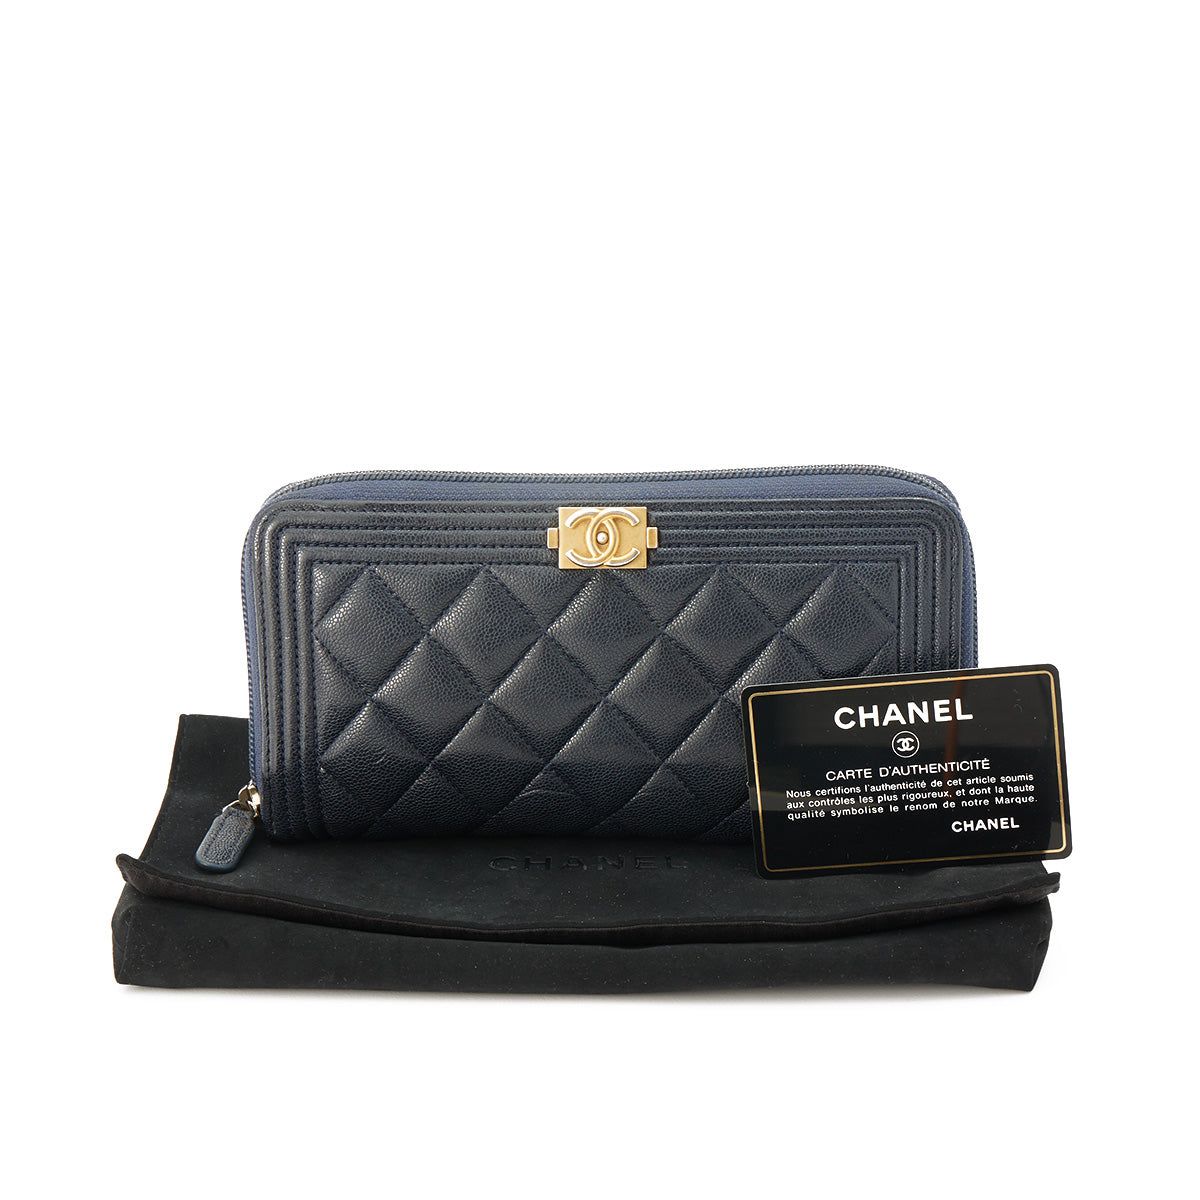 Chanel Boy Long Zip Wallet in Caviar Leather, Brushed Gold